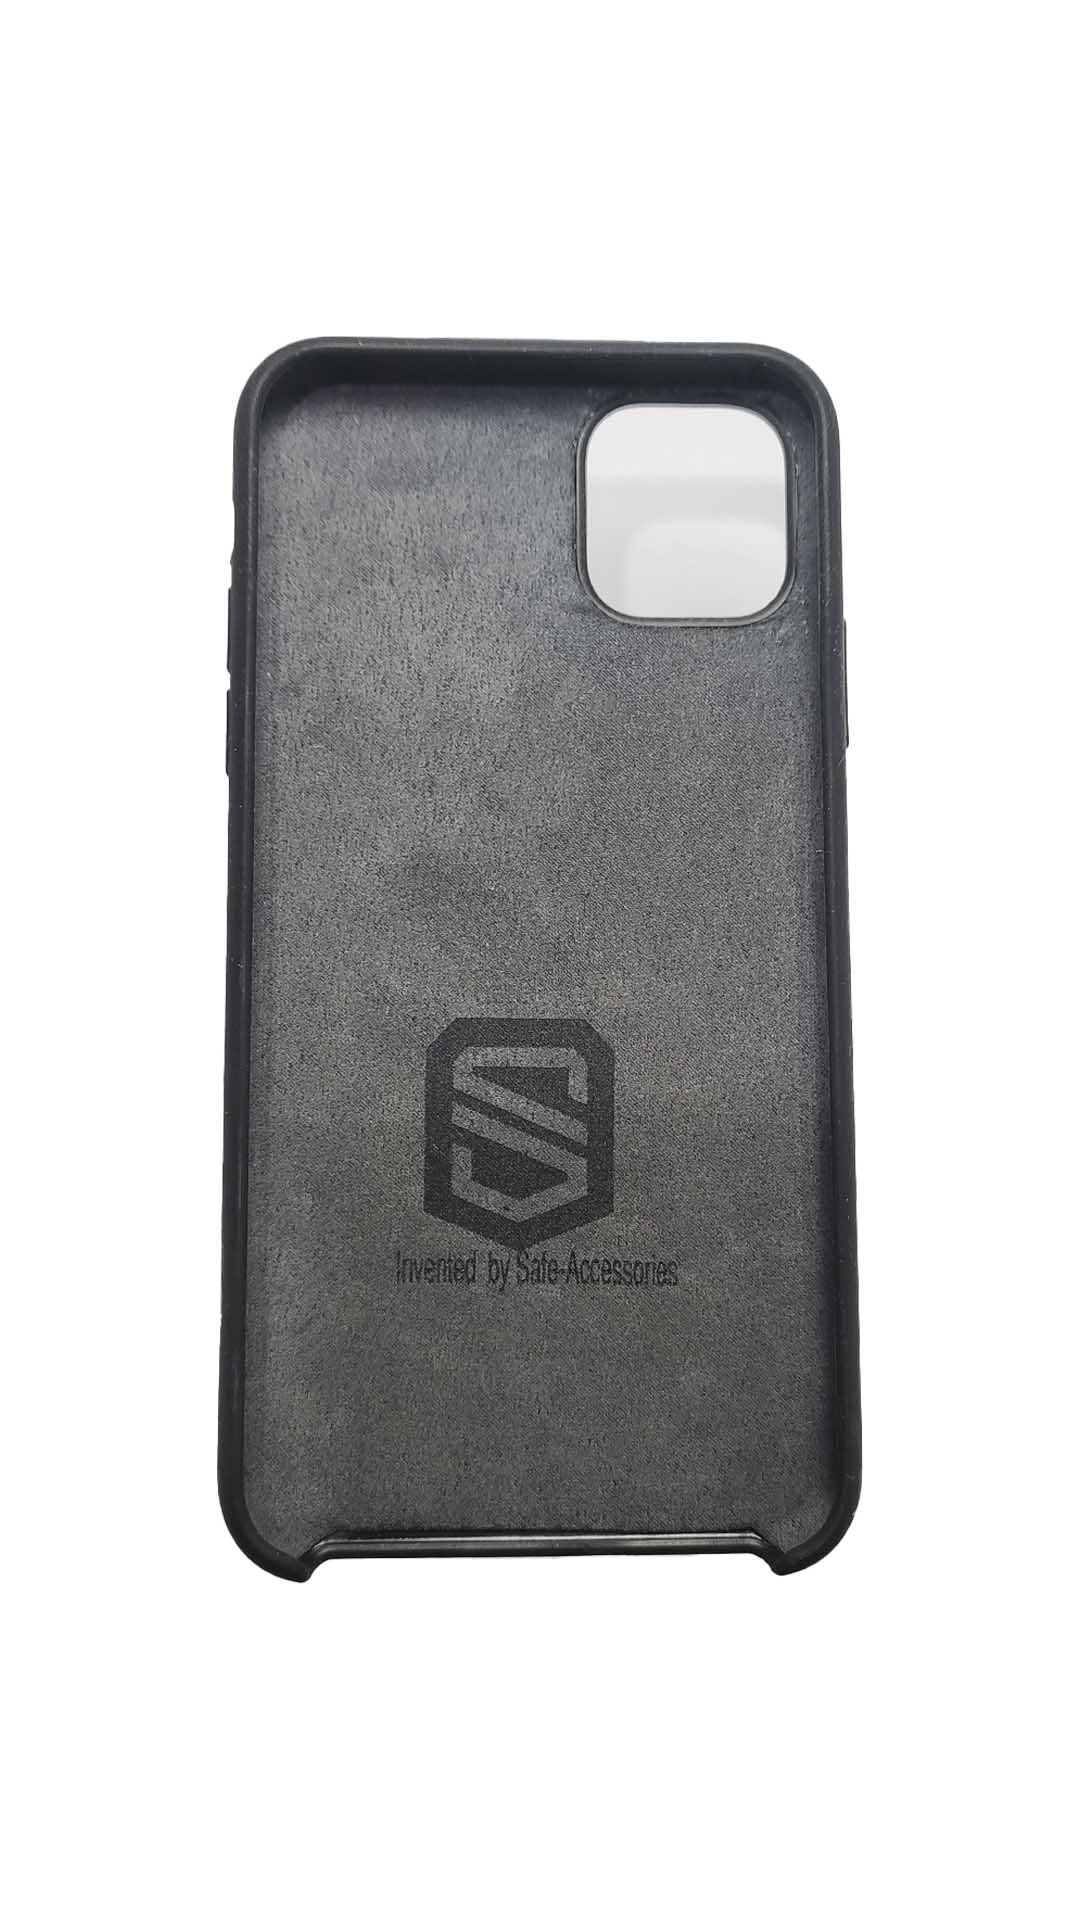 Inside view of Black Safe-Case for iPhone 11 Pro Max with Anti-radiation EMF protection